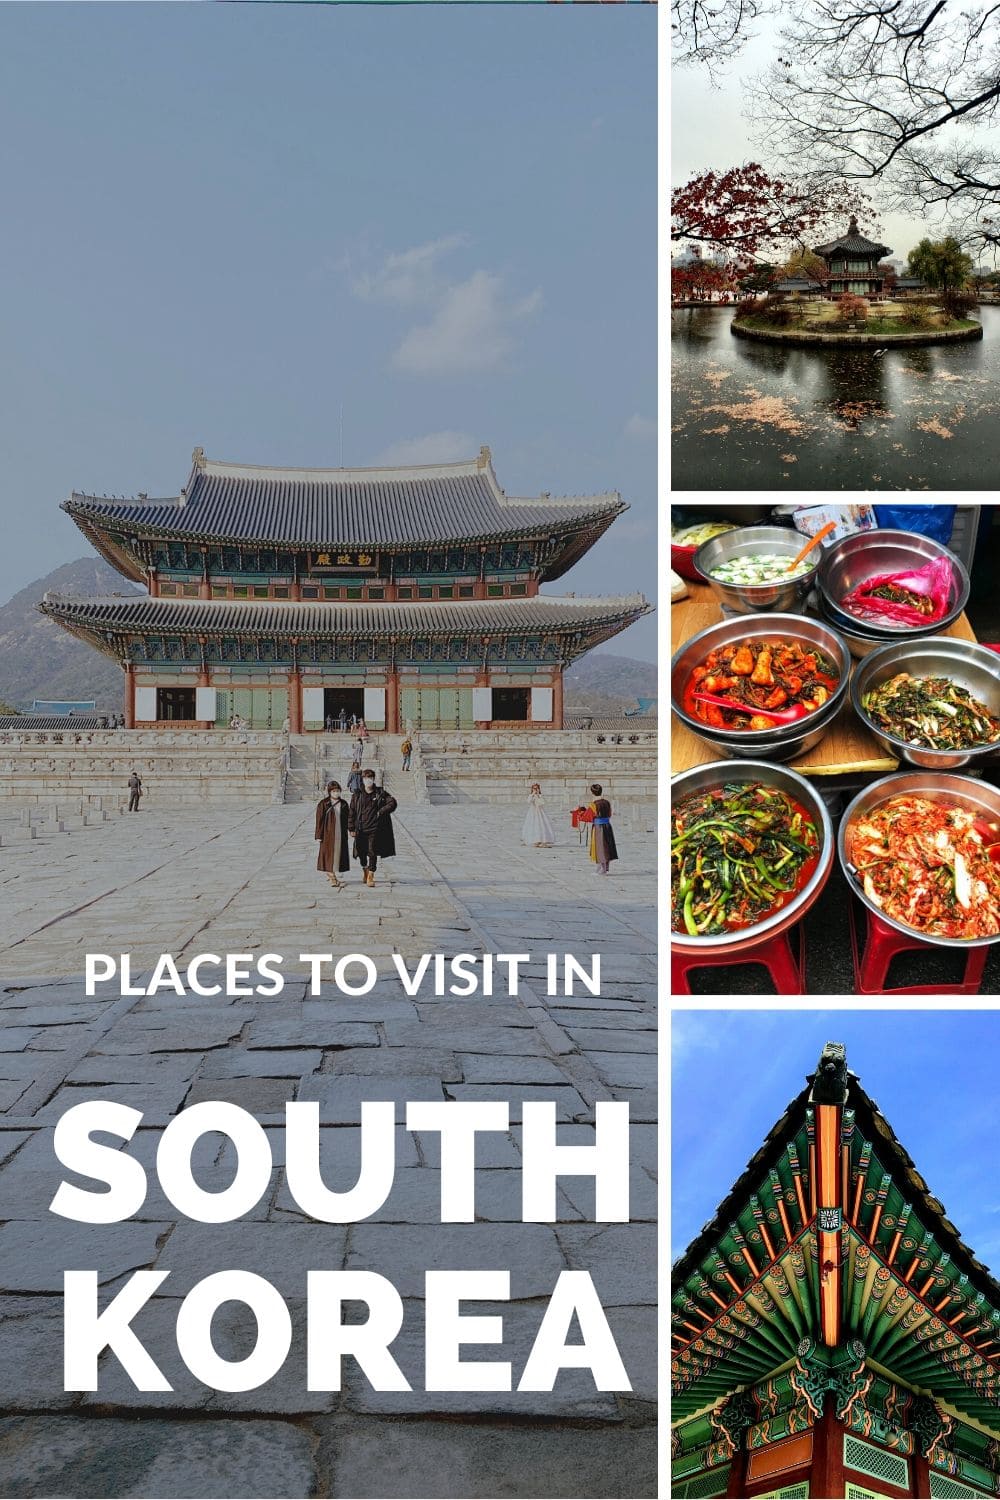 Places to visit in South Korea